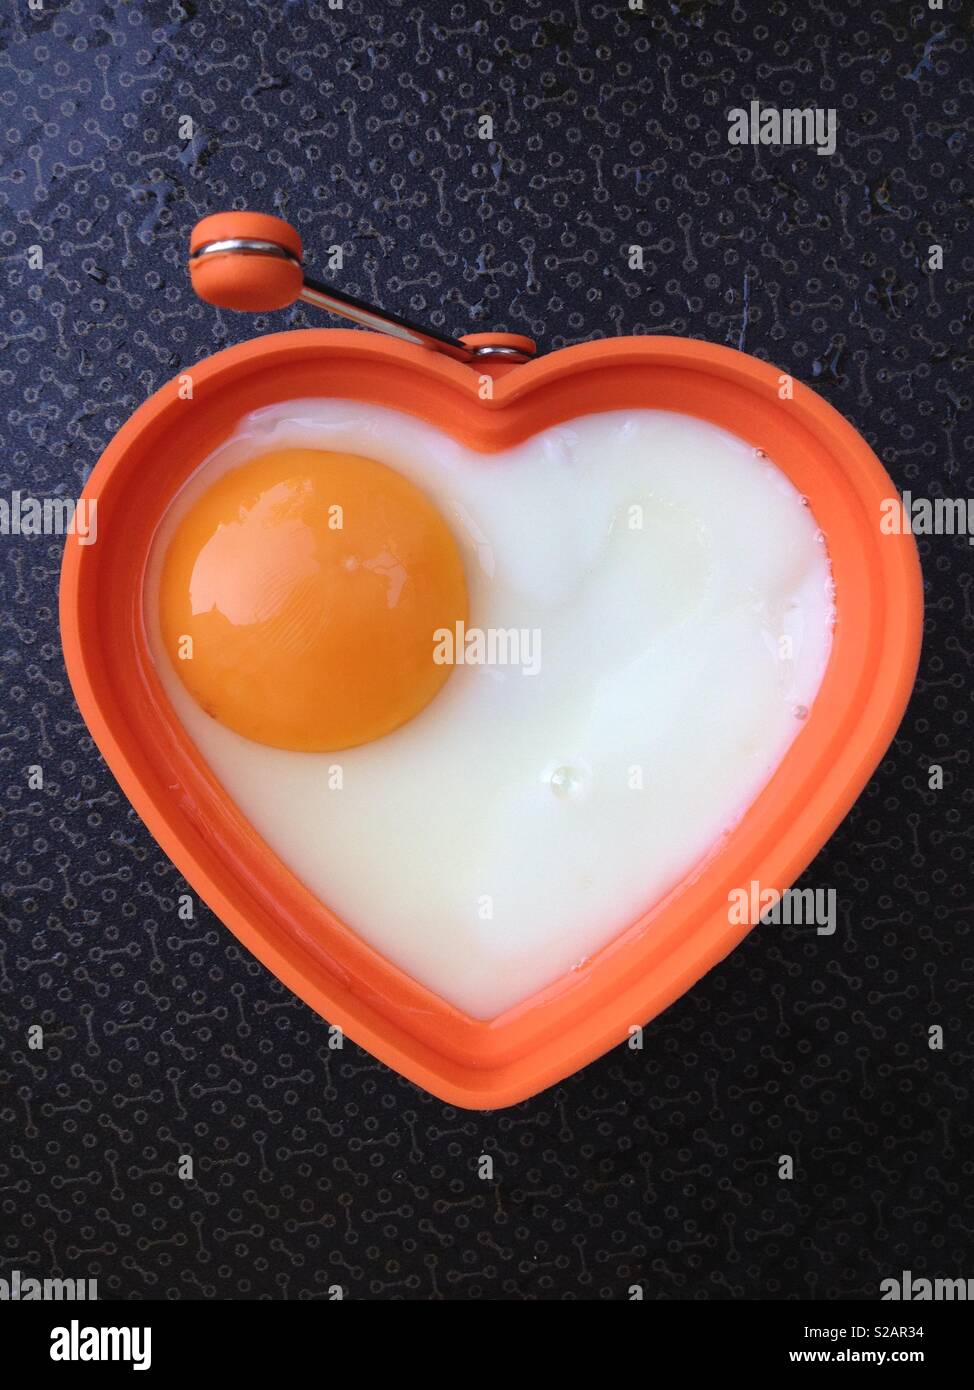 Fried egg being fried / frying in a frying pan. The eggs is in the shape of a healthy heart to imply a healthy diet and good well being. Stock Photo